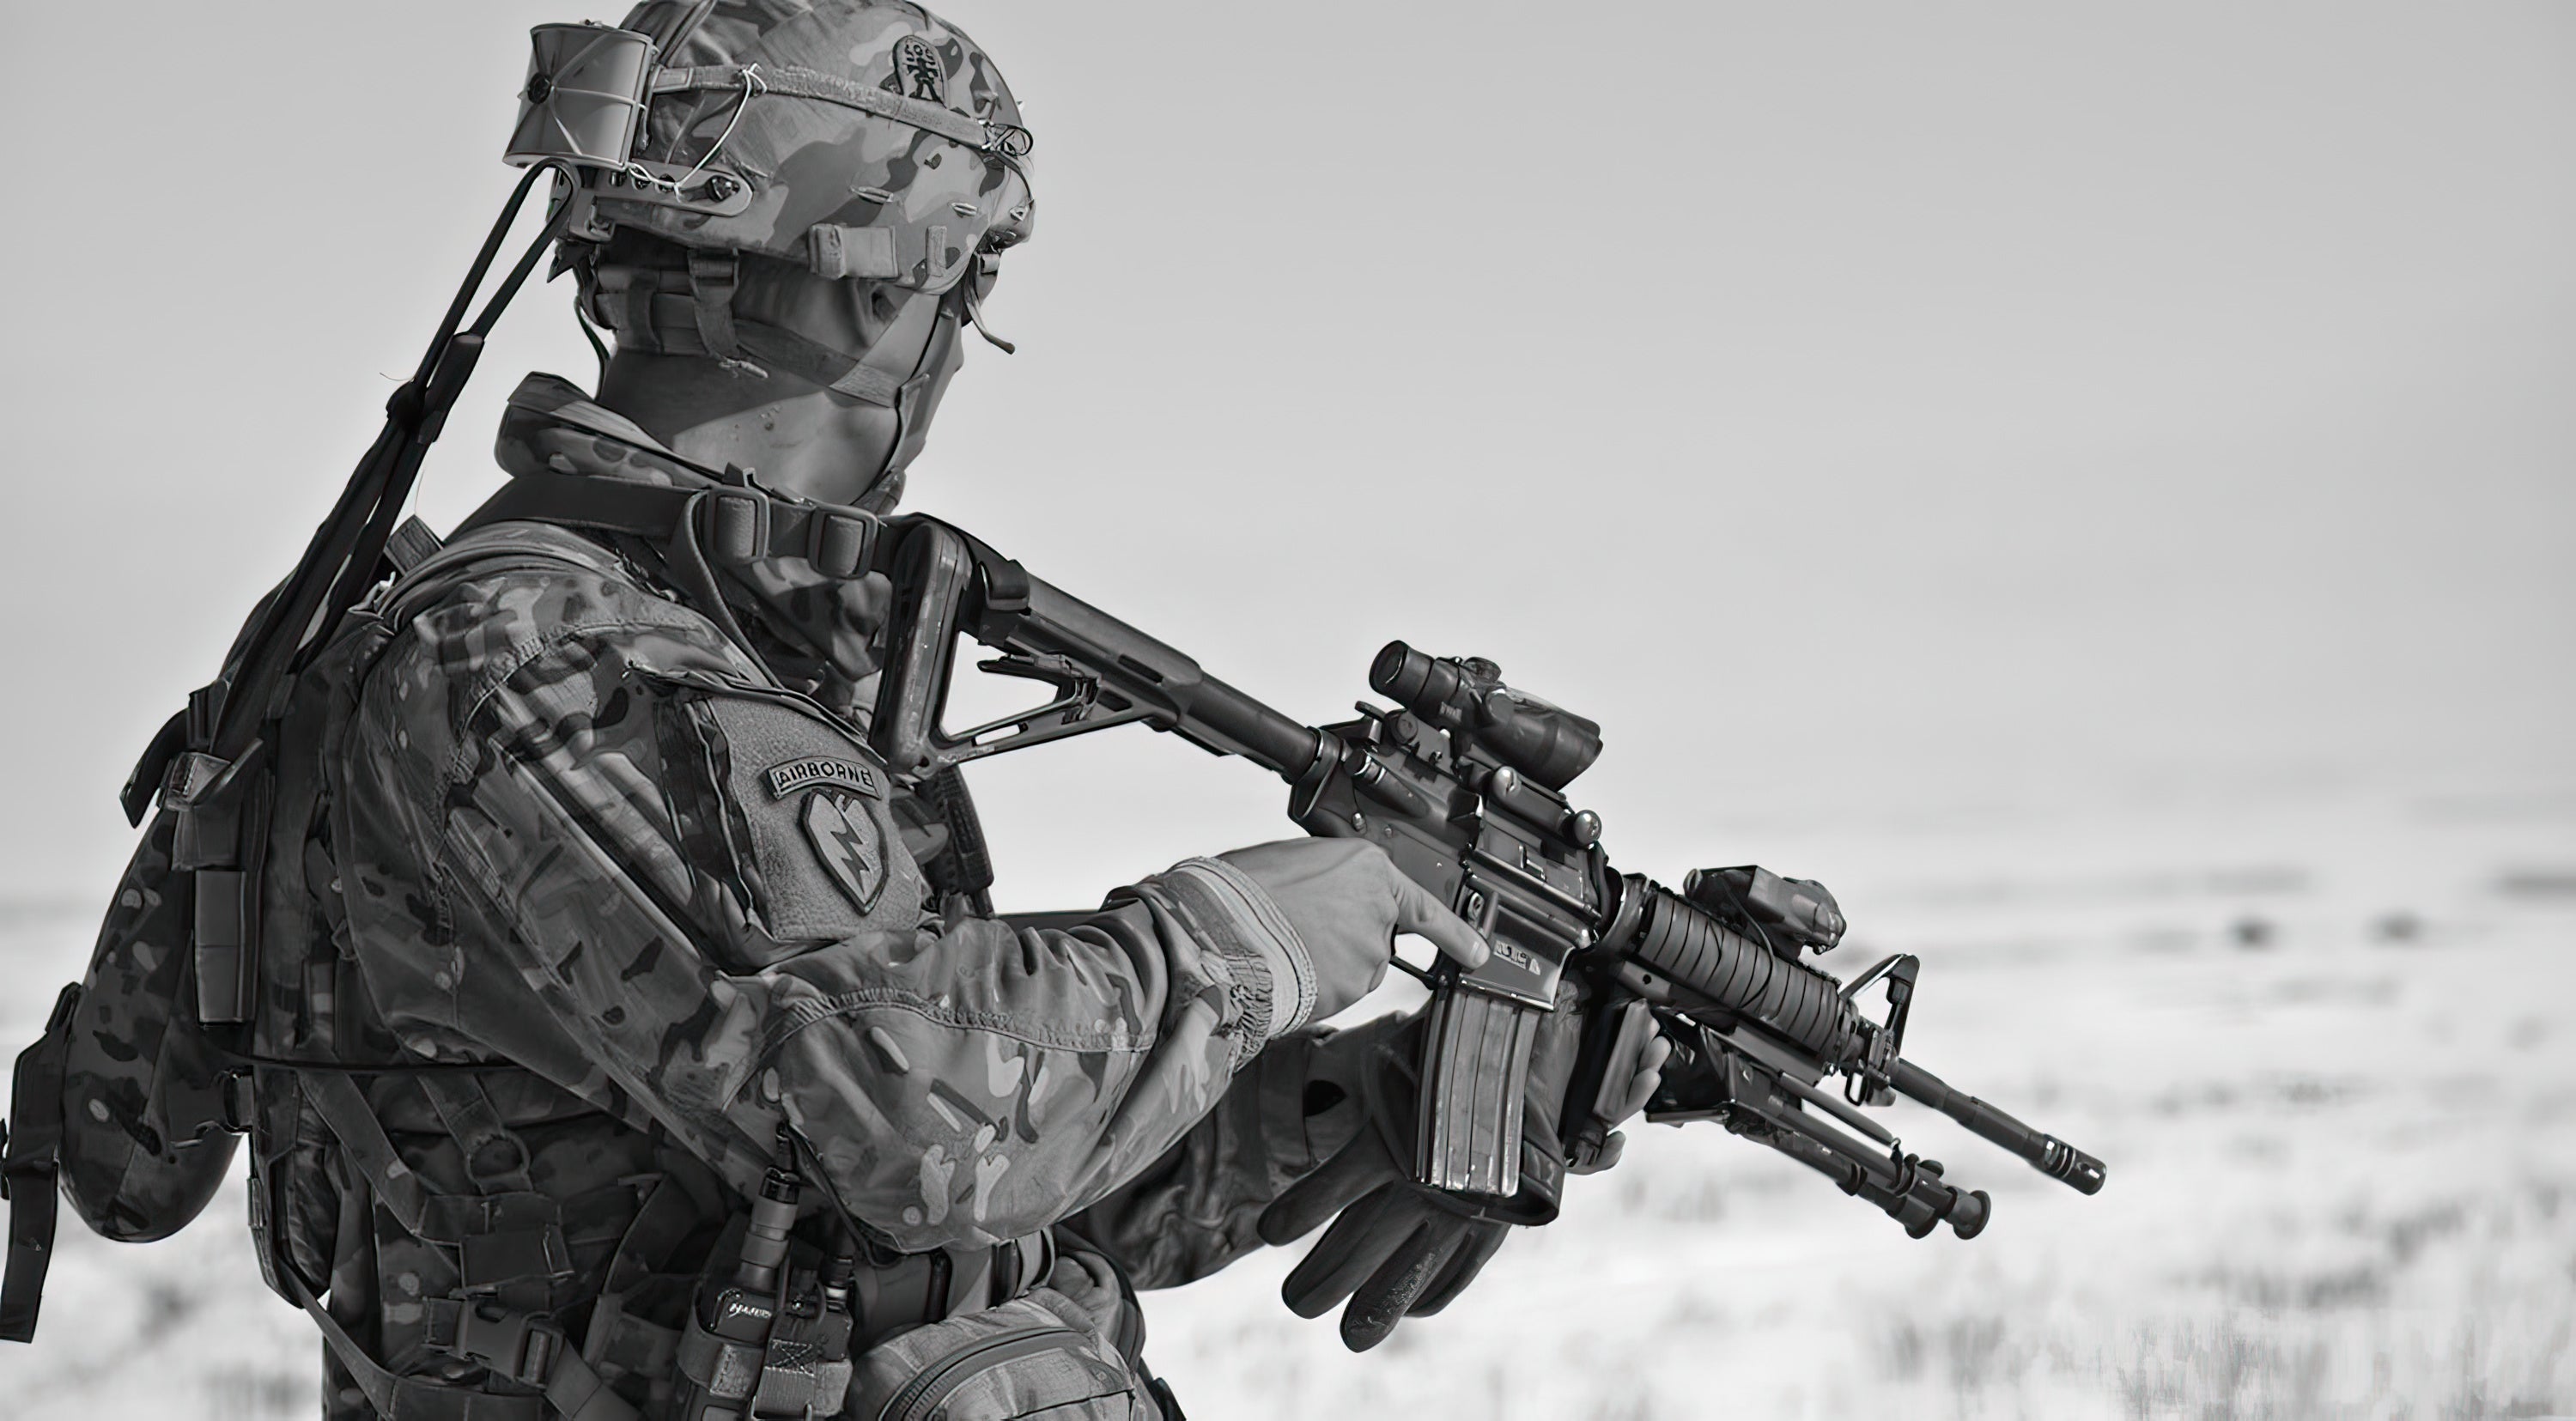 2020 Military Story Showcase - Image of airborne ranger with firearm